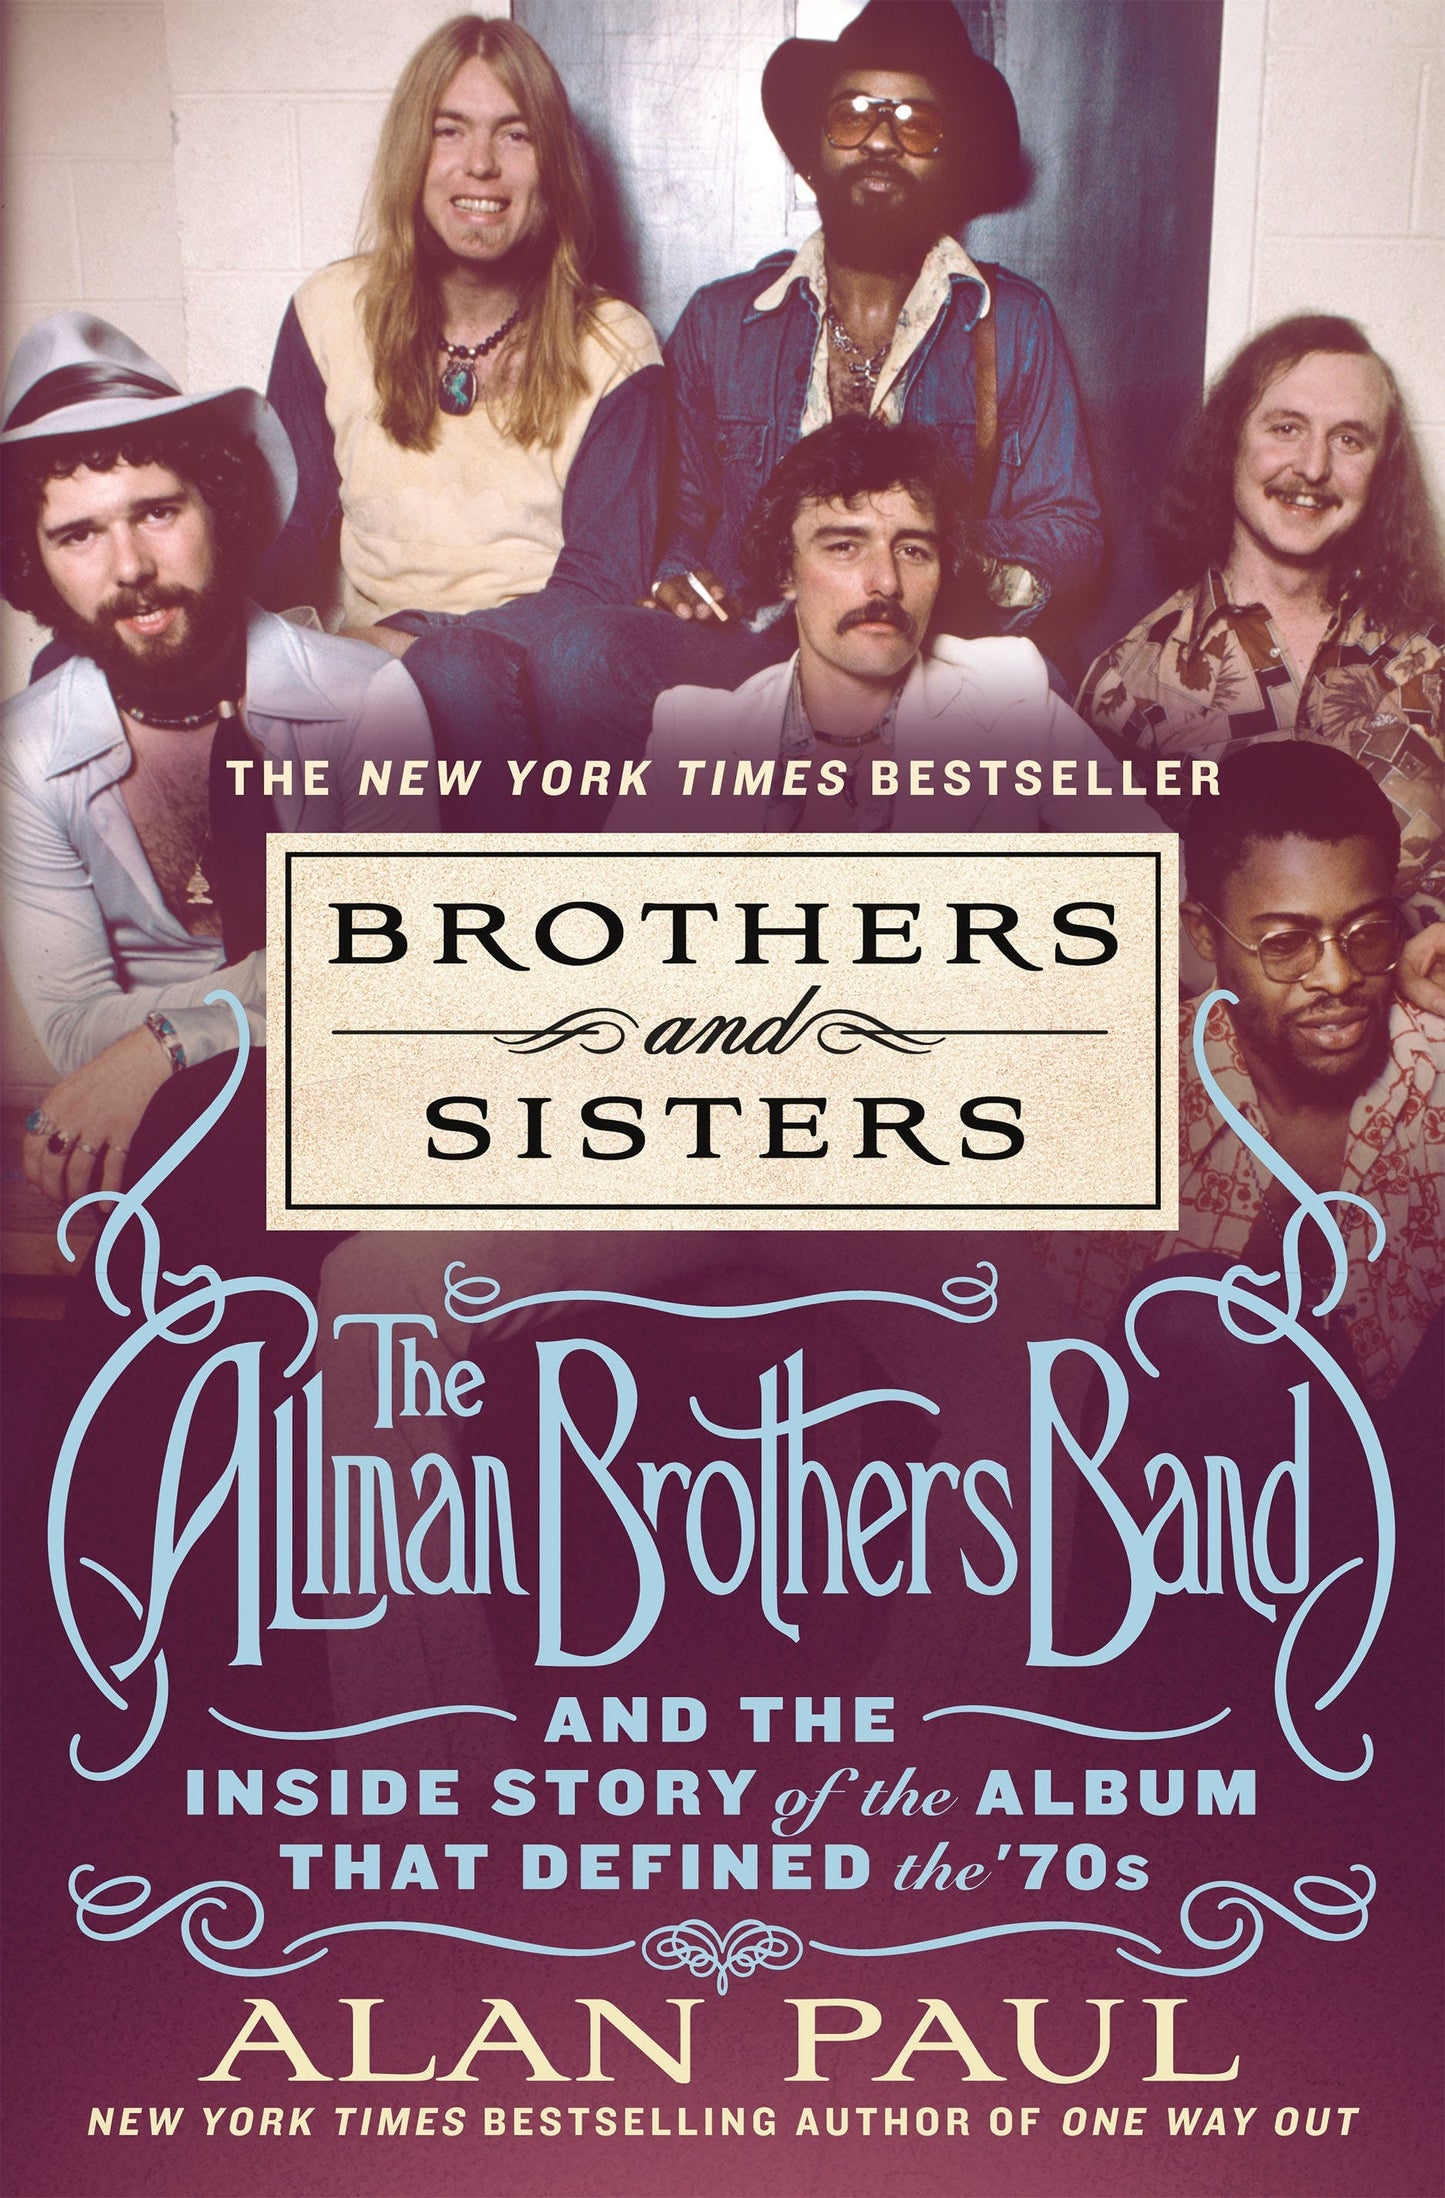 THE ALLMAN BROTHERS BAND - BROTHERS AND SISTERS: THE ALLMAN BROTHERS BAND AND THE ALBUM THAT DEFINED THE '70s - HARDCOVER - BOOK